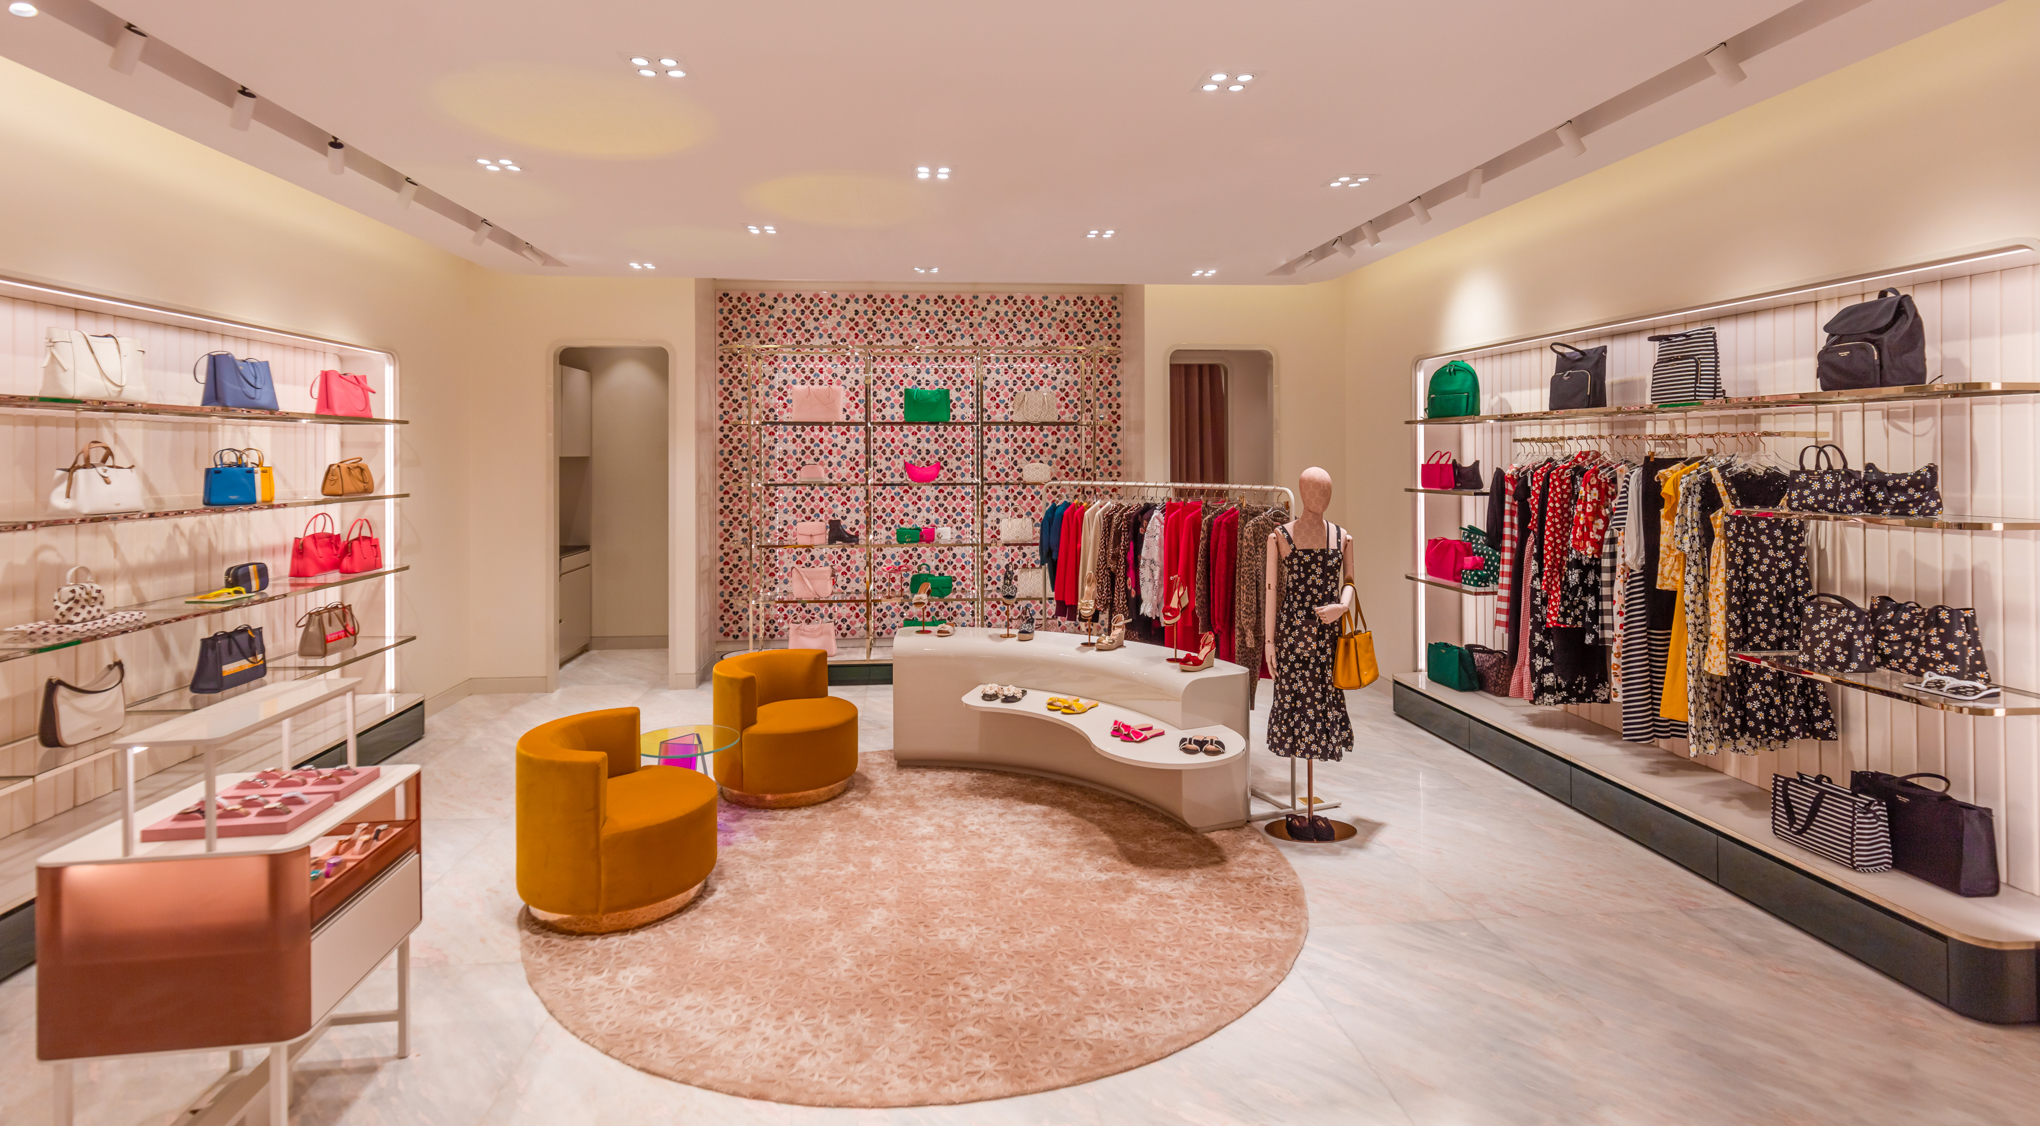 KATE SPADE NEW YORK CELEBRATES THE OPENING OF ITS NEW STORE | iCraze